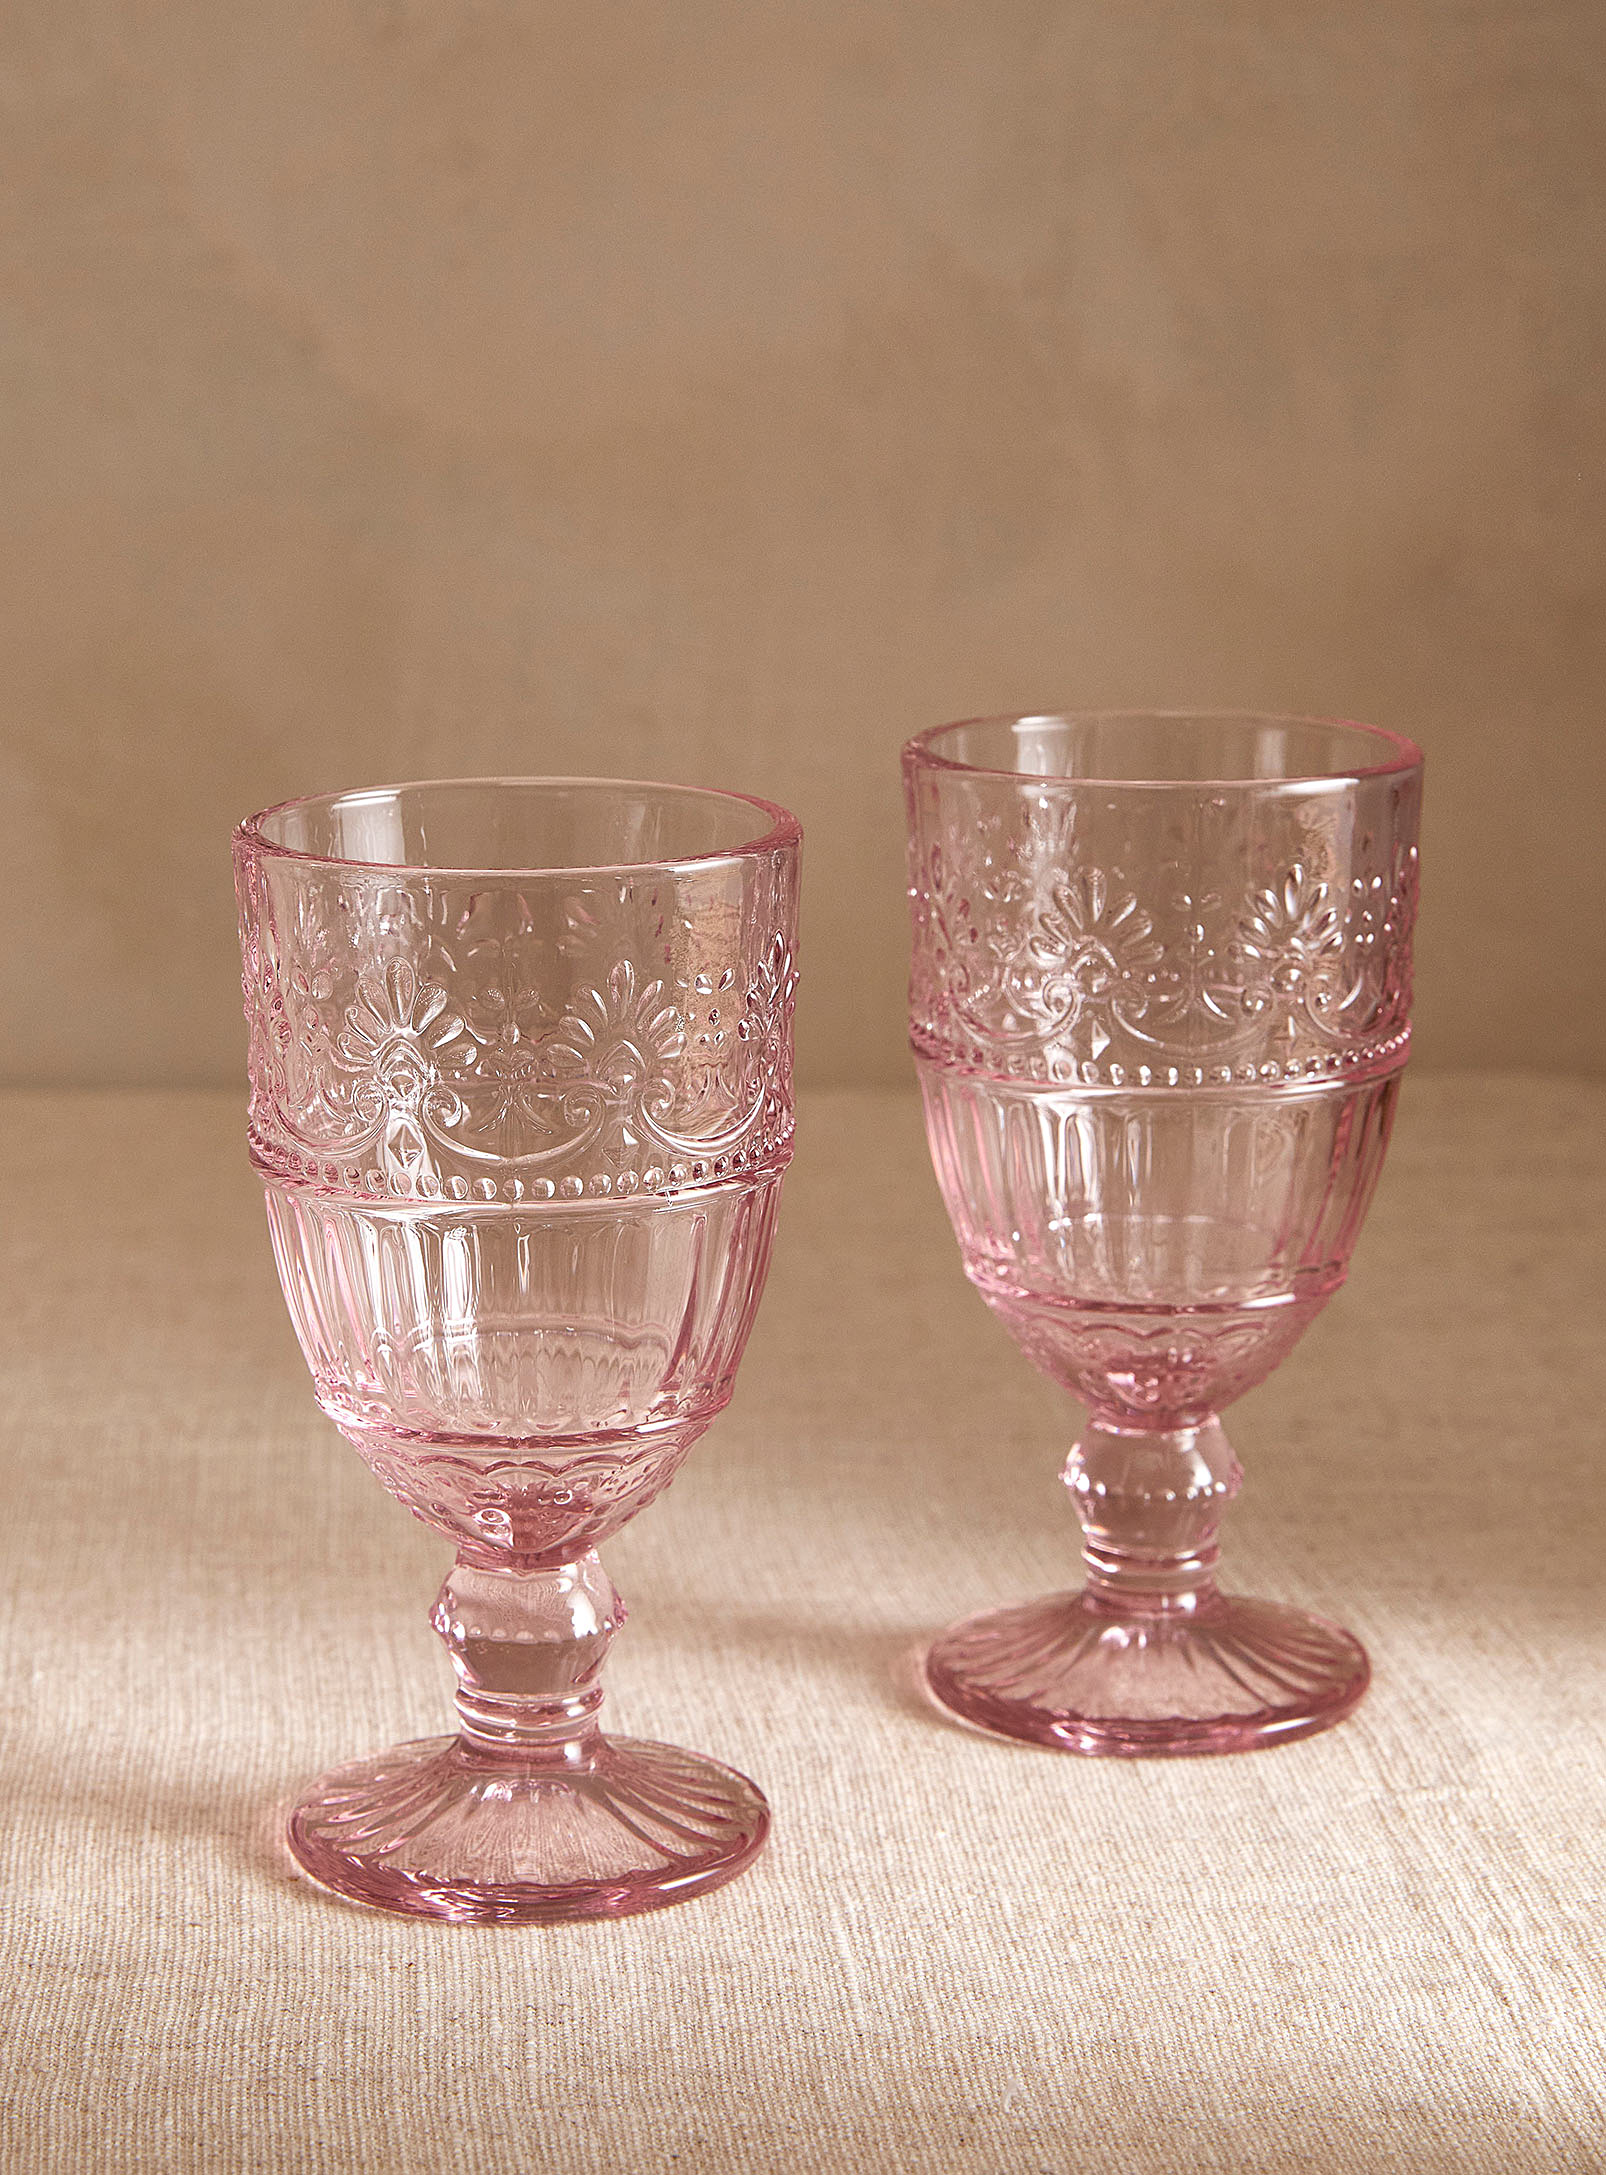 Simons Maison Embossed Floral Wine Glasses Set Of 2 In Pink